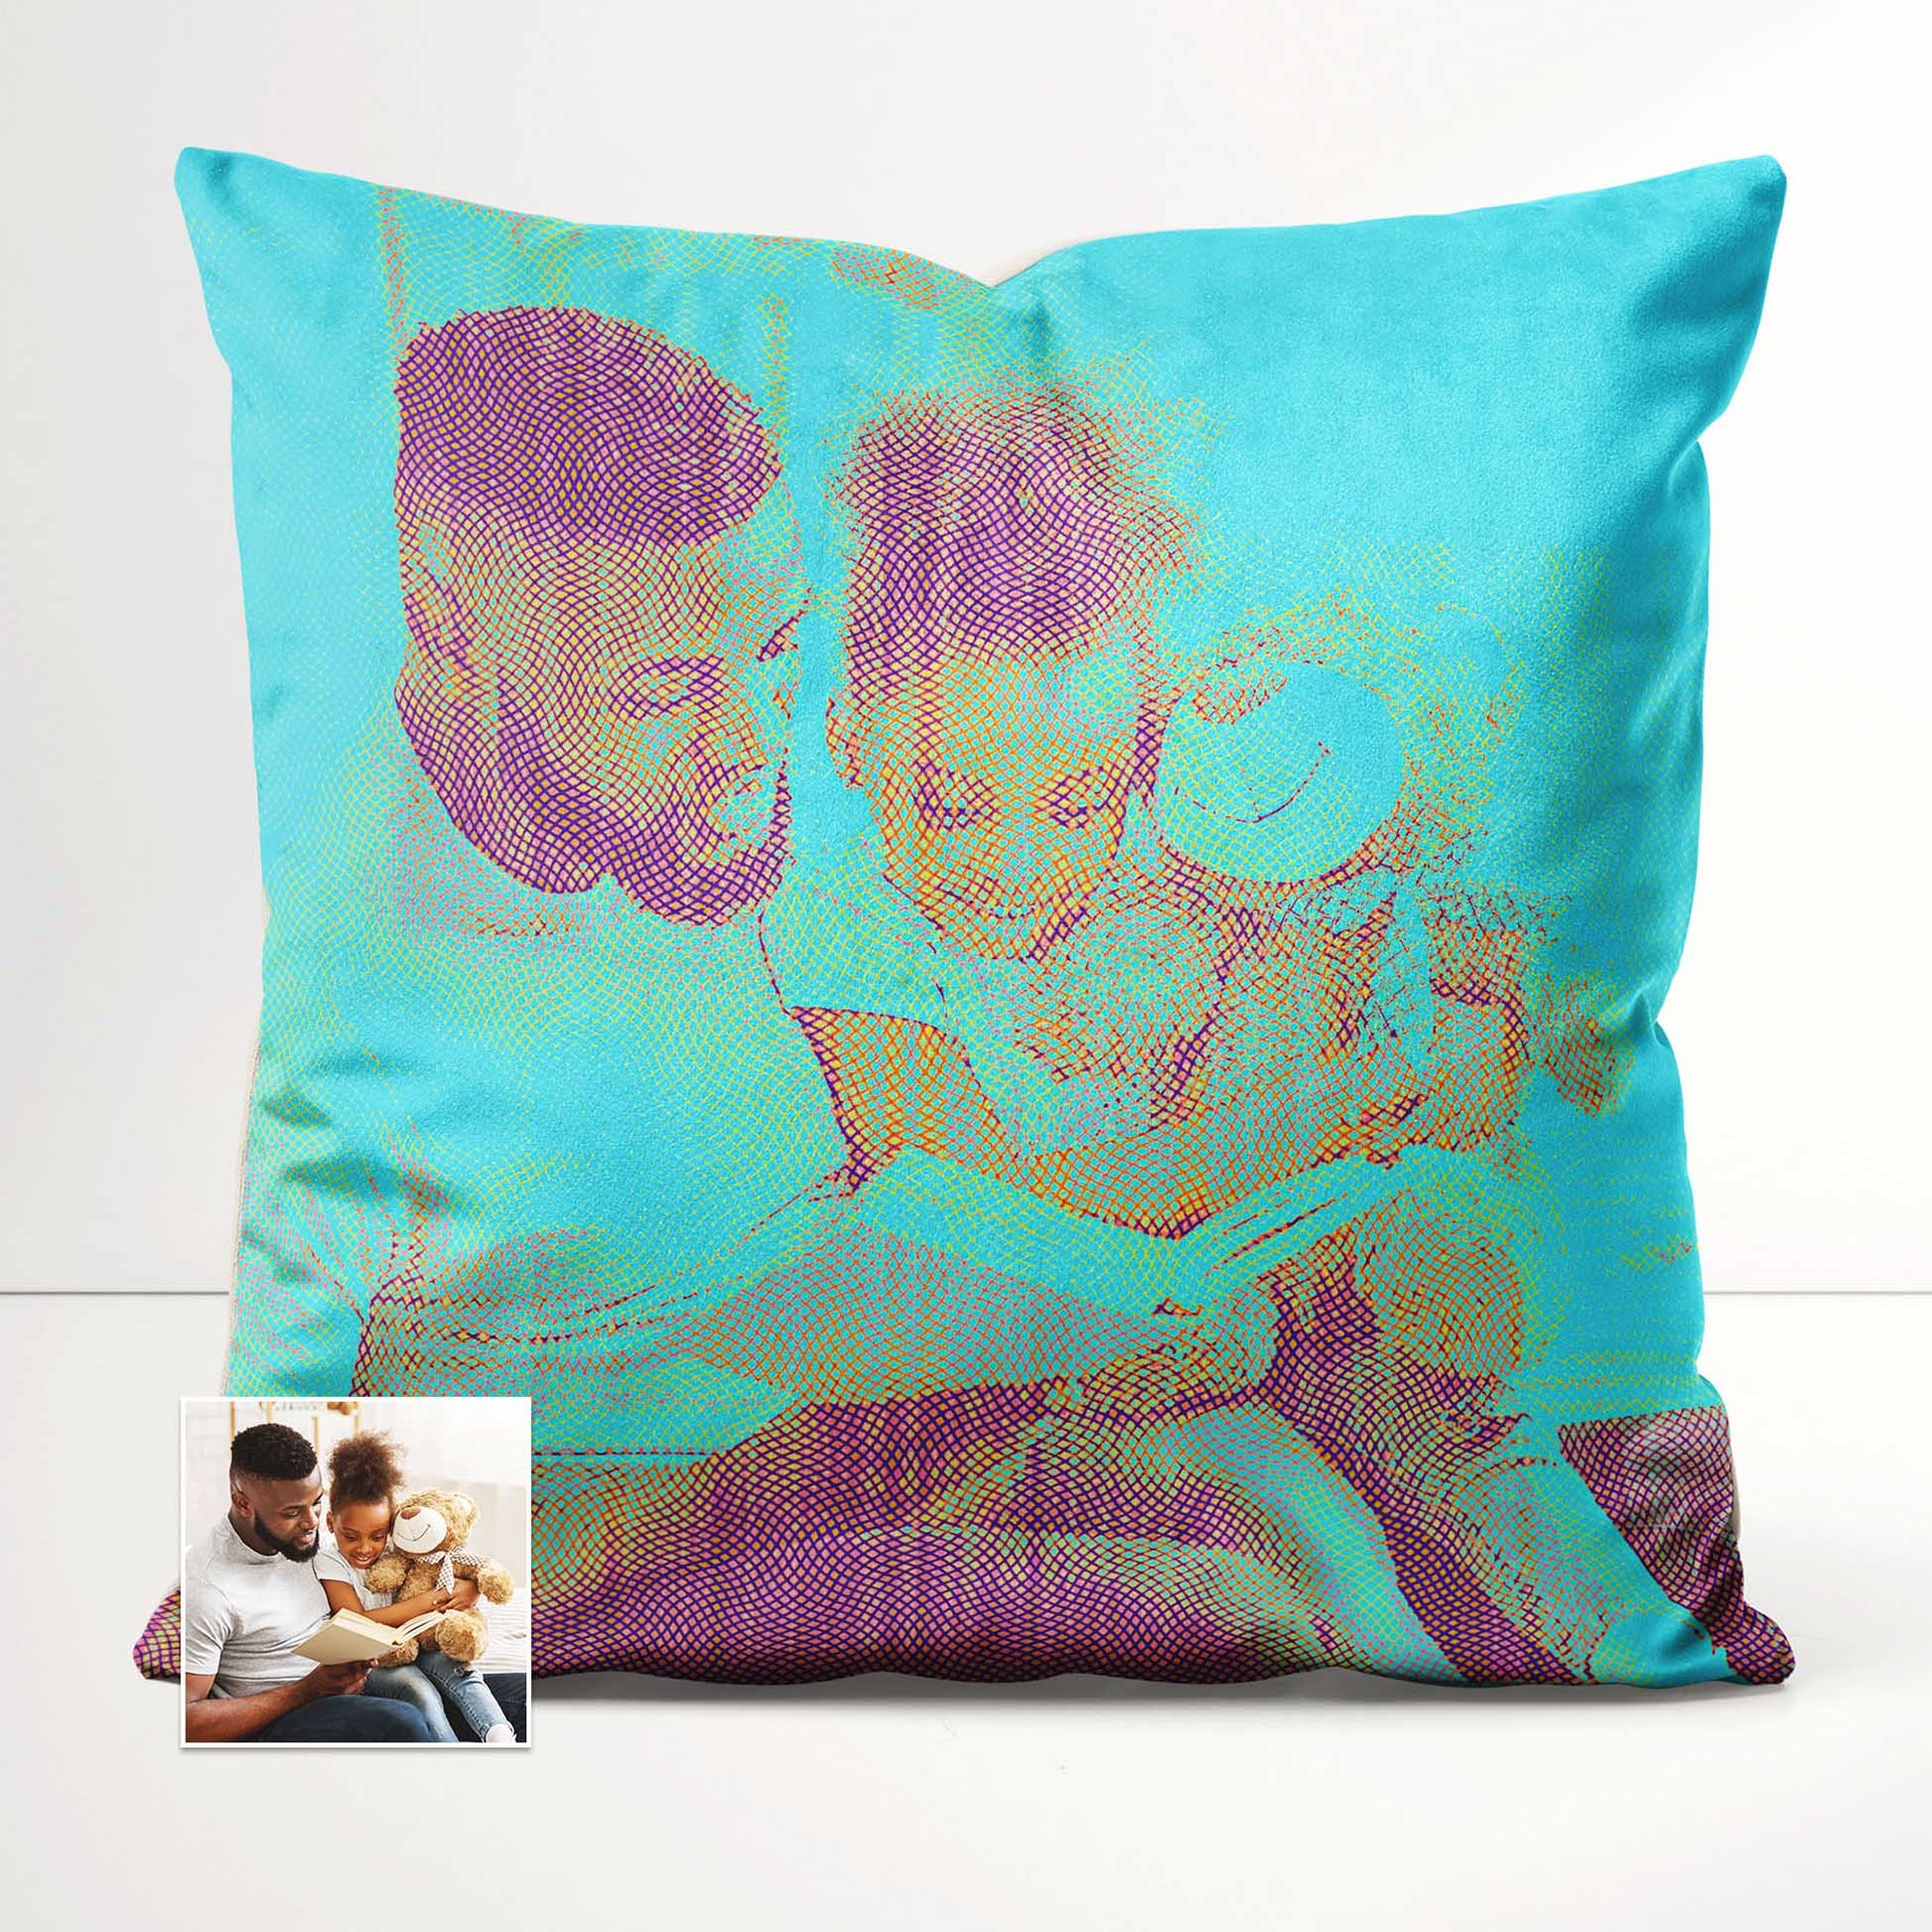 Personalised comfort awaits with the Personalised Blue Engraved Cushion. Made from soft velvet fabric, this cool and fresh cushion can be customised with a print from your photo, allowing you to add a touch of fun and sentimentality 